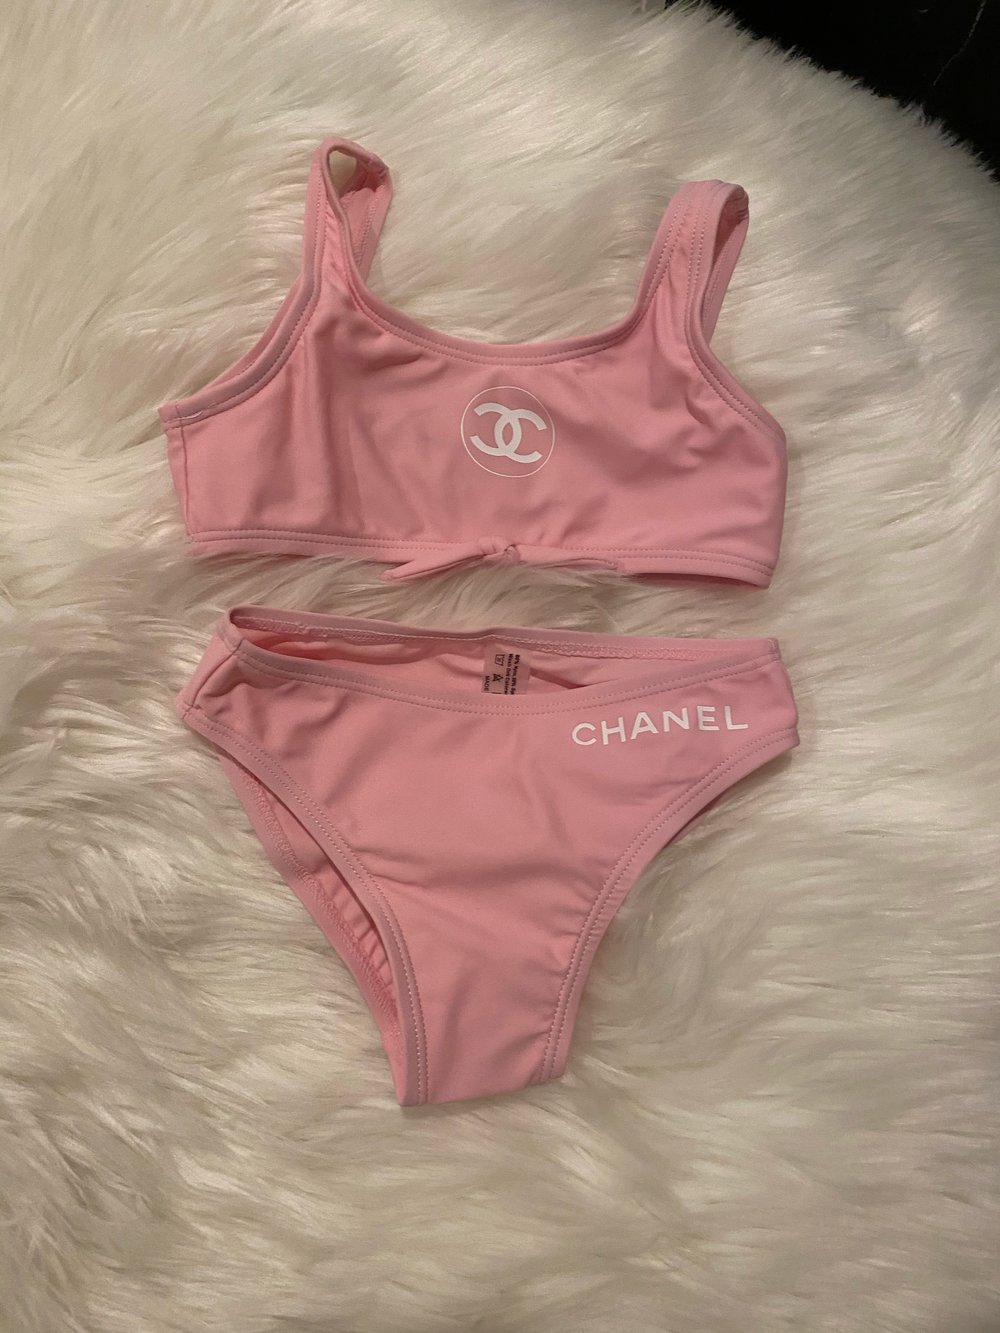 chanel bathing suits